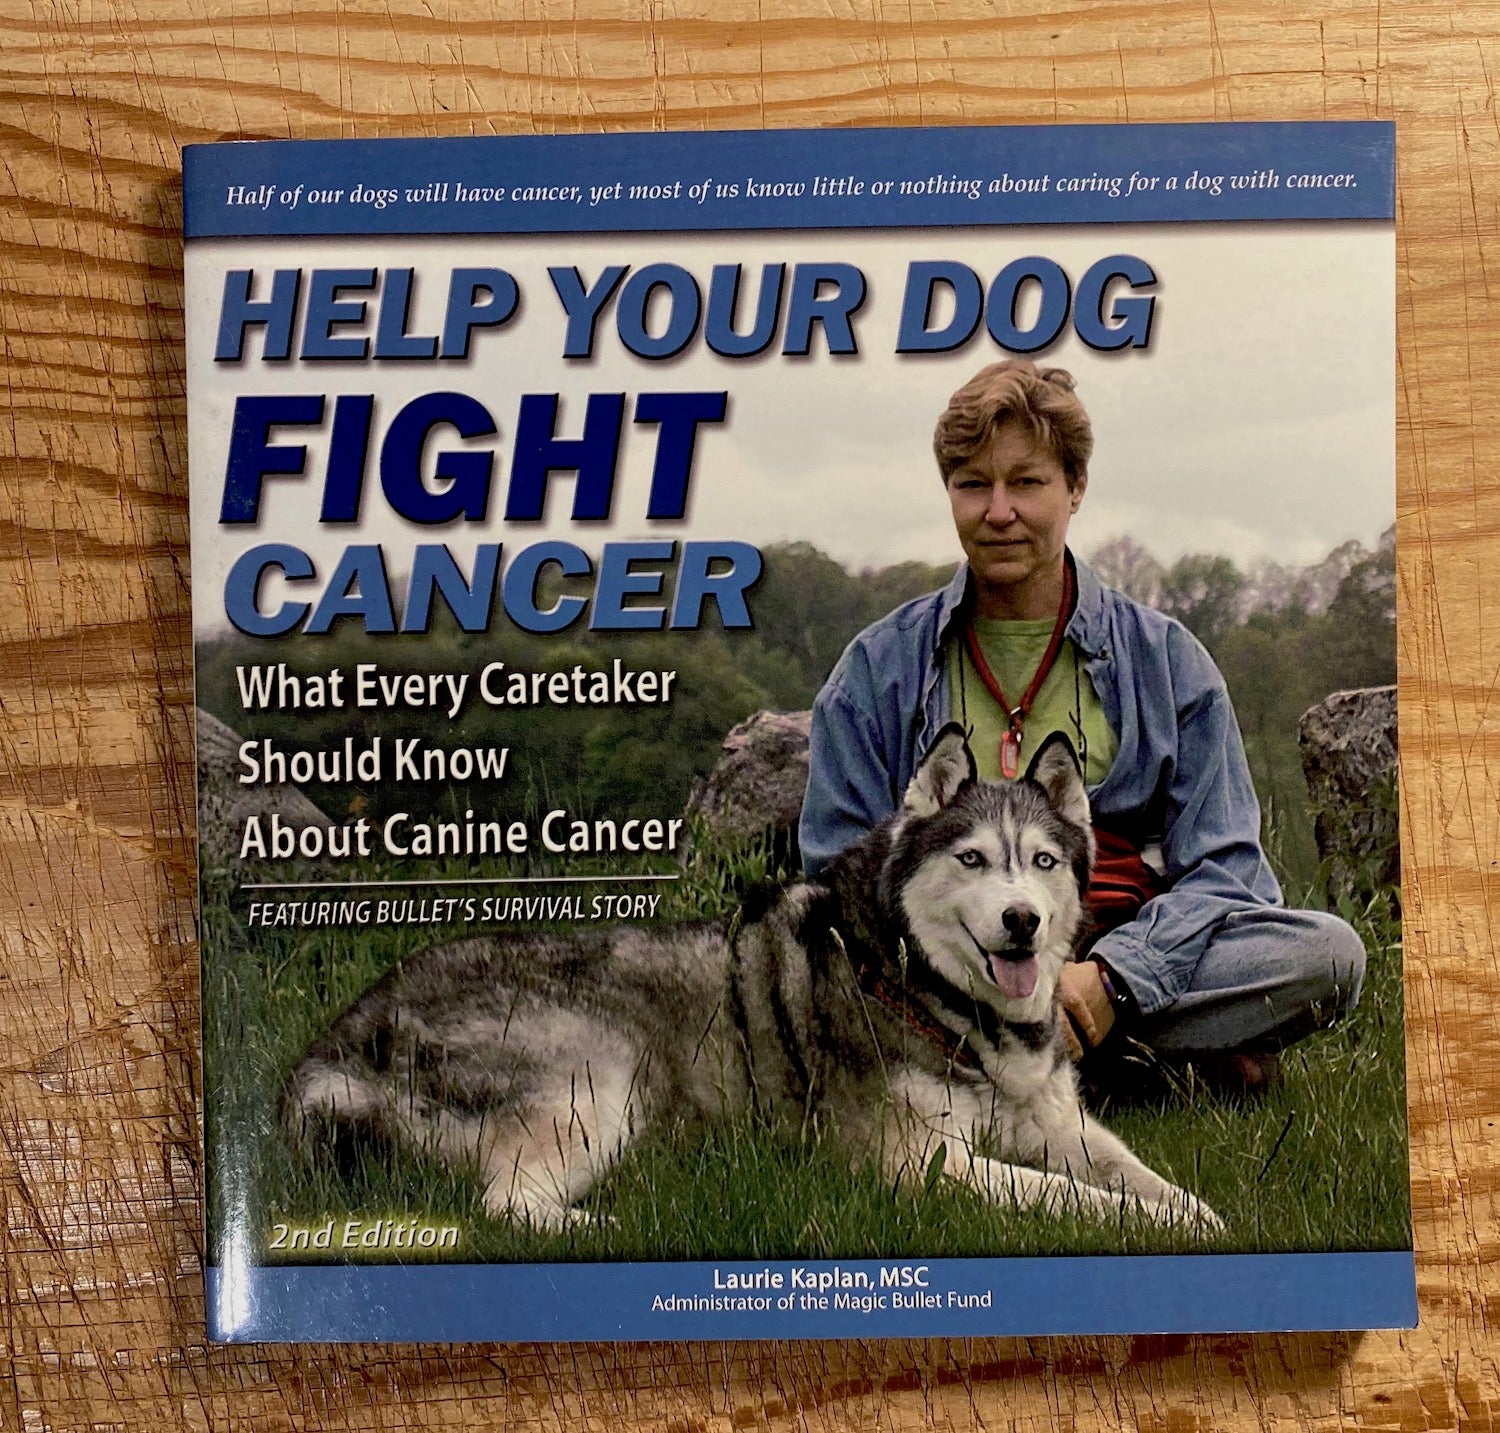 Help Your Dog Fight Cancer: What Every Caretaker Should Know About Canine Cancer, Featuring Bullet's Survival Story, 2nd Edition, new